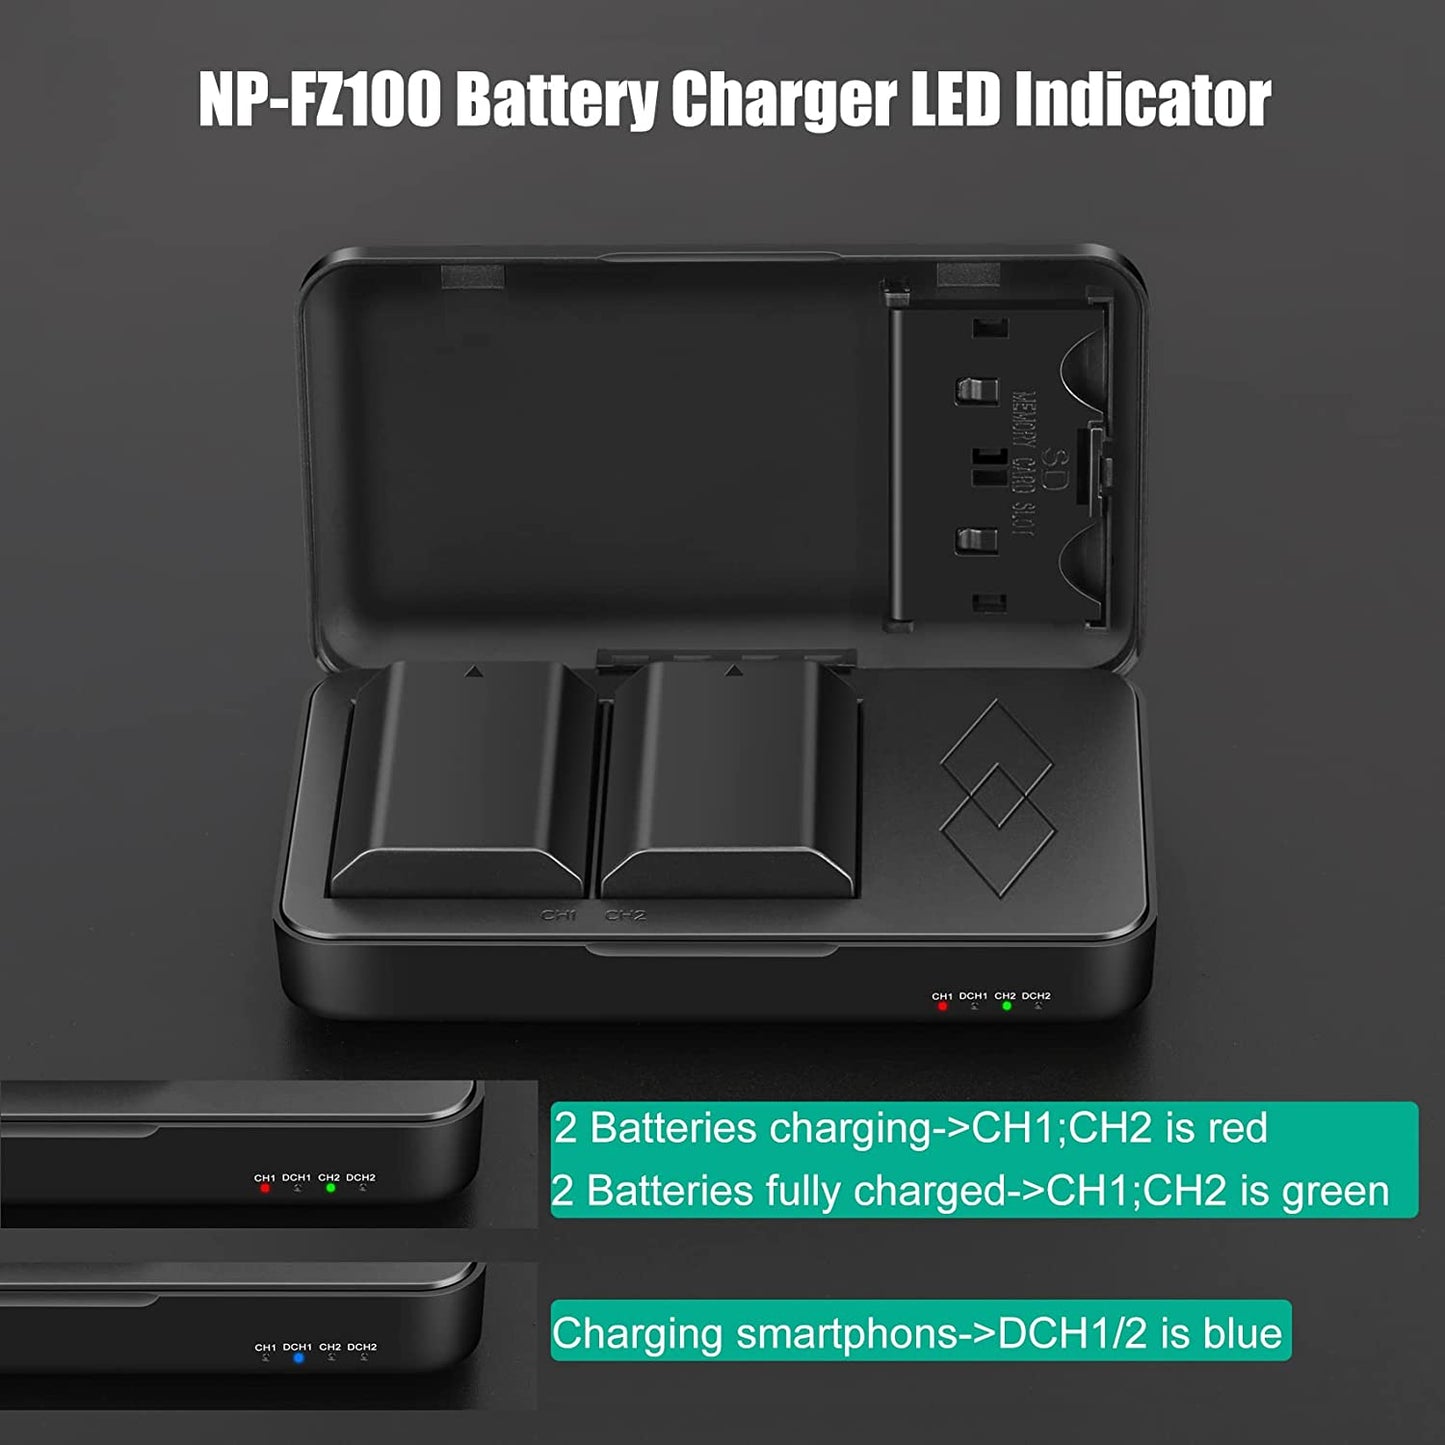 NP-FZ100 Battery Replacement and A7Iii Battery Charger for Sony A7 III, Sony A1, Alpha A7R III, A7R IV, A9, A9 II, A6600, Alpha 9S, A7R3 A7S III, A7R III Battery, 2 Packs